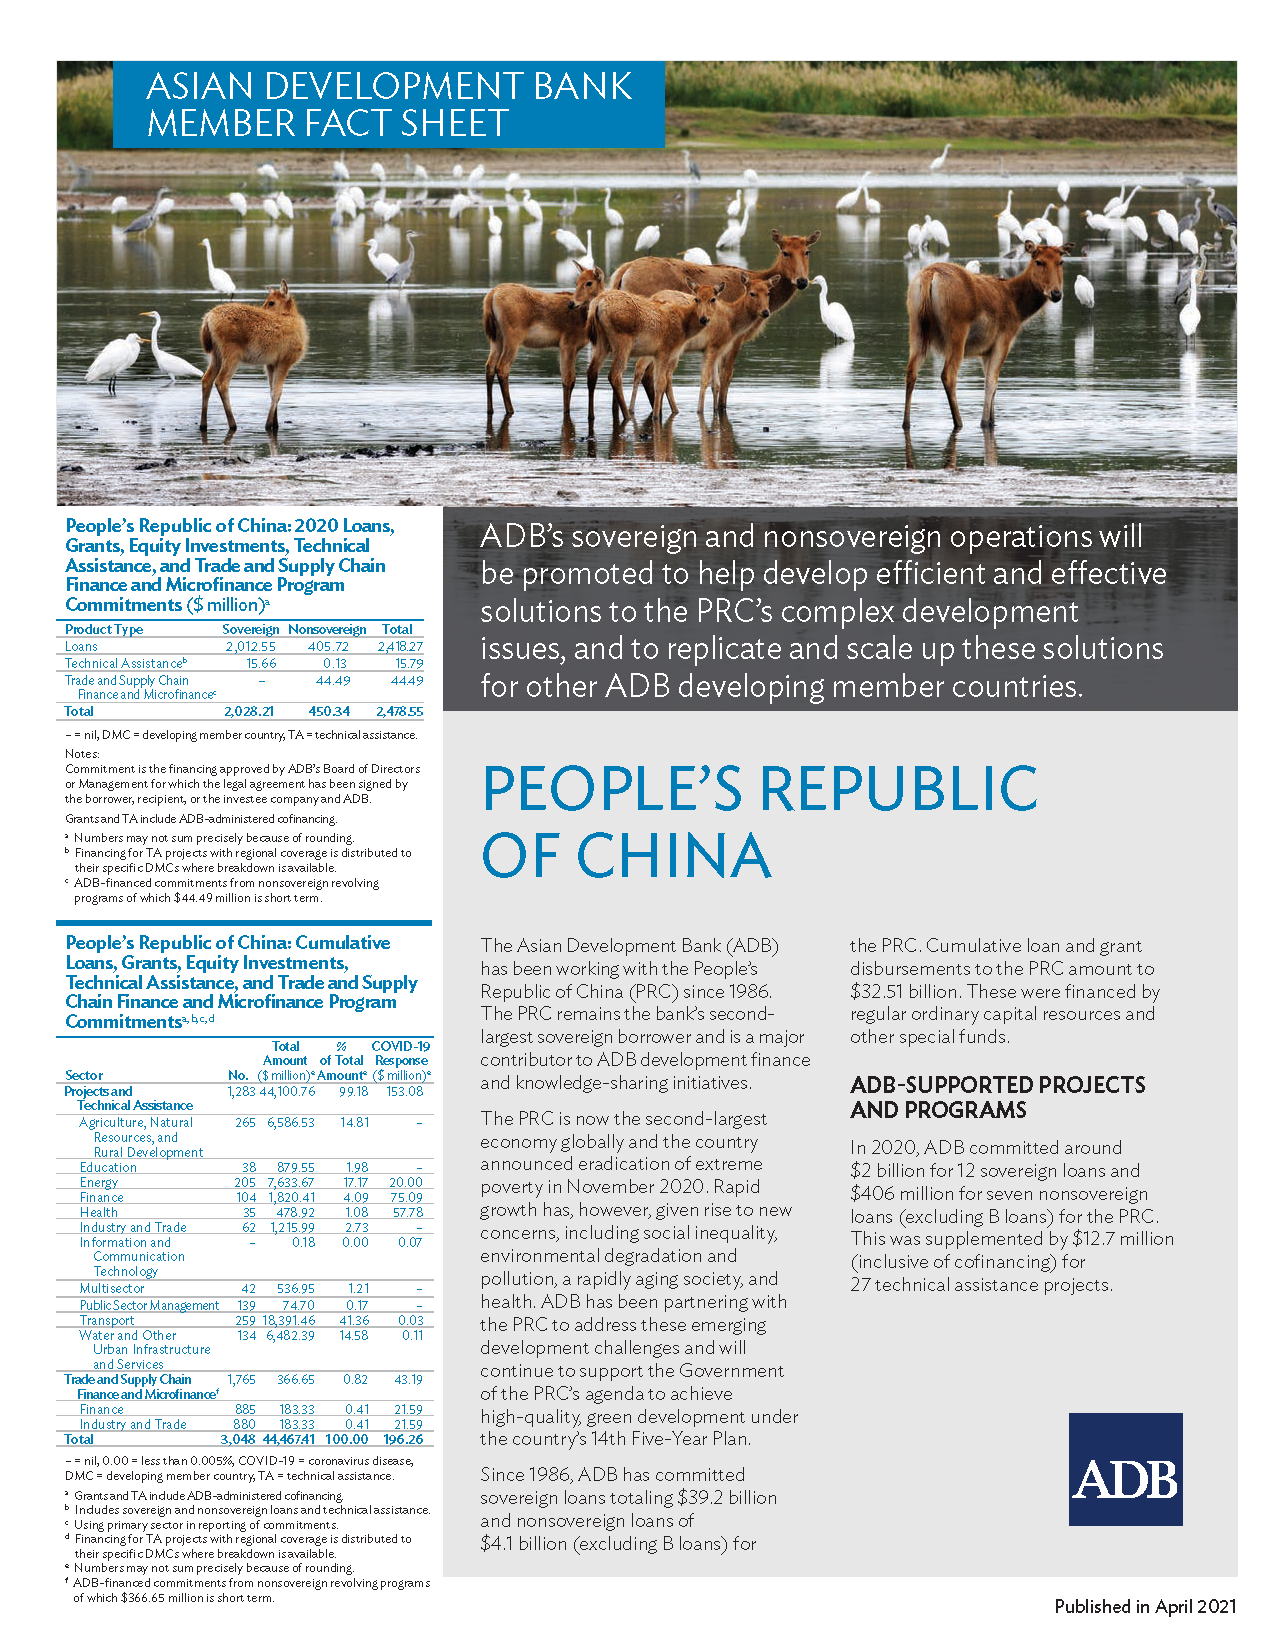 Asian Development Bank and the People’s Republic of China: Fact sheet